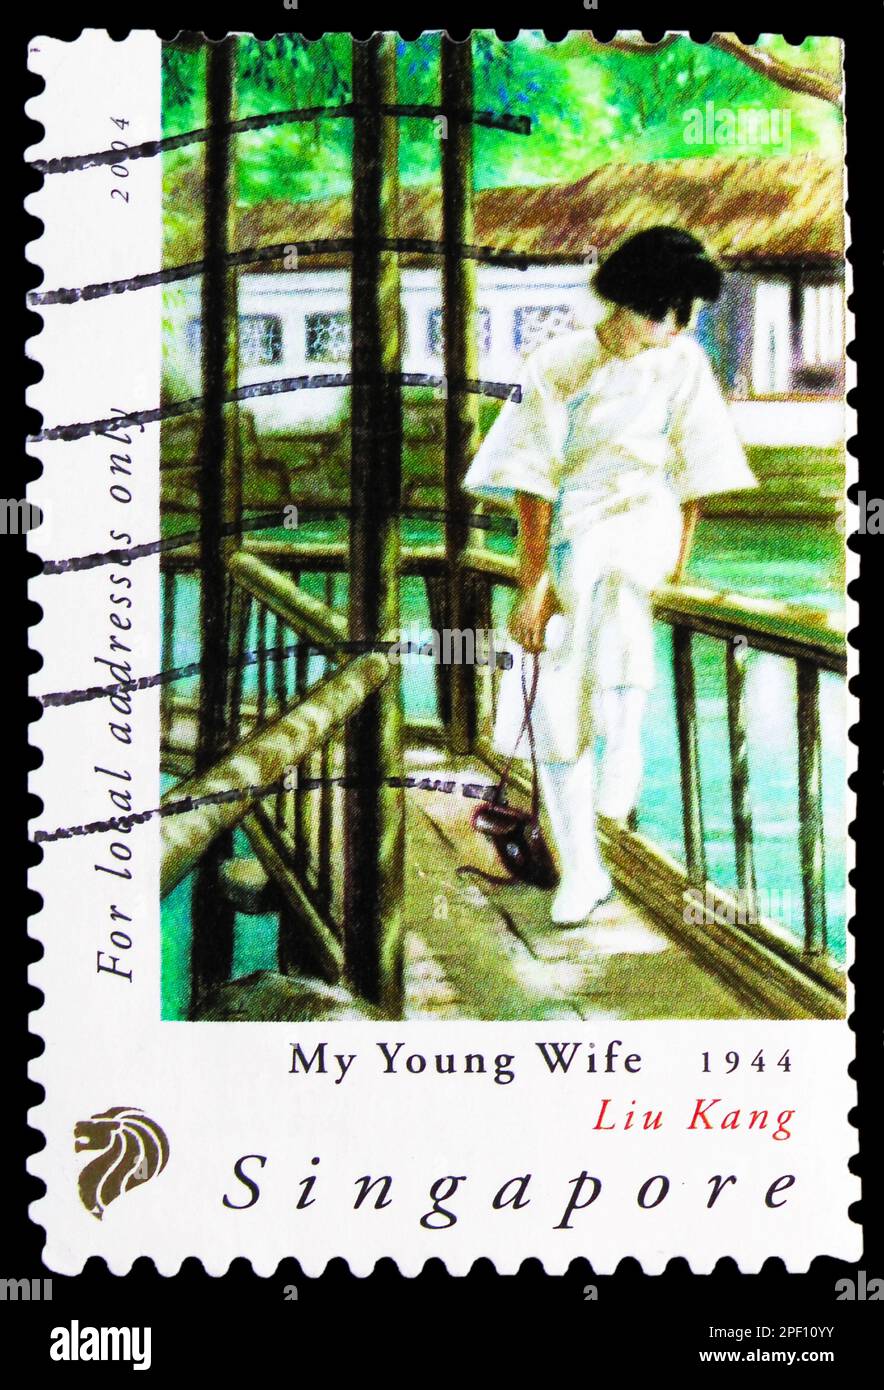 MOSCOW, RUSSIA - FEBRUARY 17, 2023: Postage stamp printed in Singapore shows 'My Young Wife' 1944, Art Series - Liu Kang and Ong Kim Seng serie, circa Stock Photo